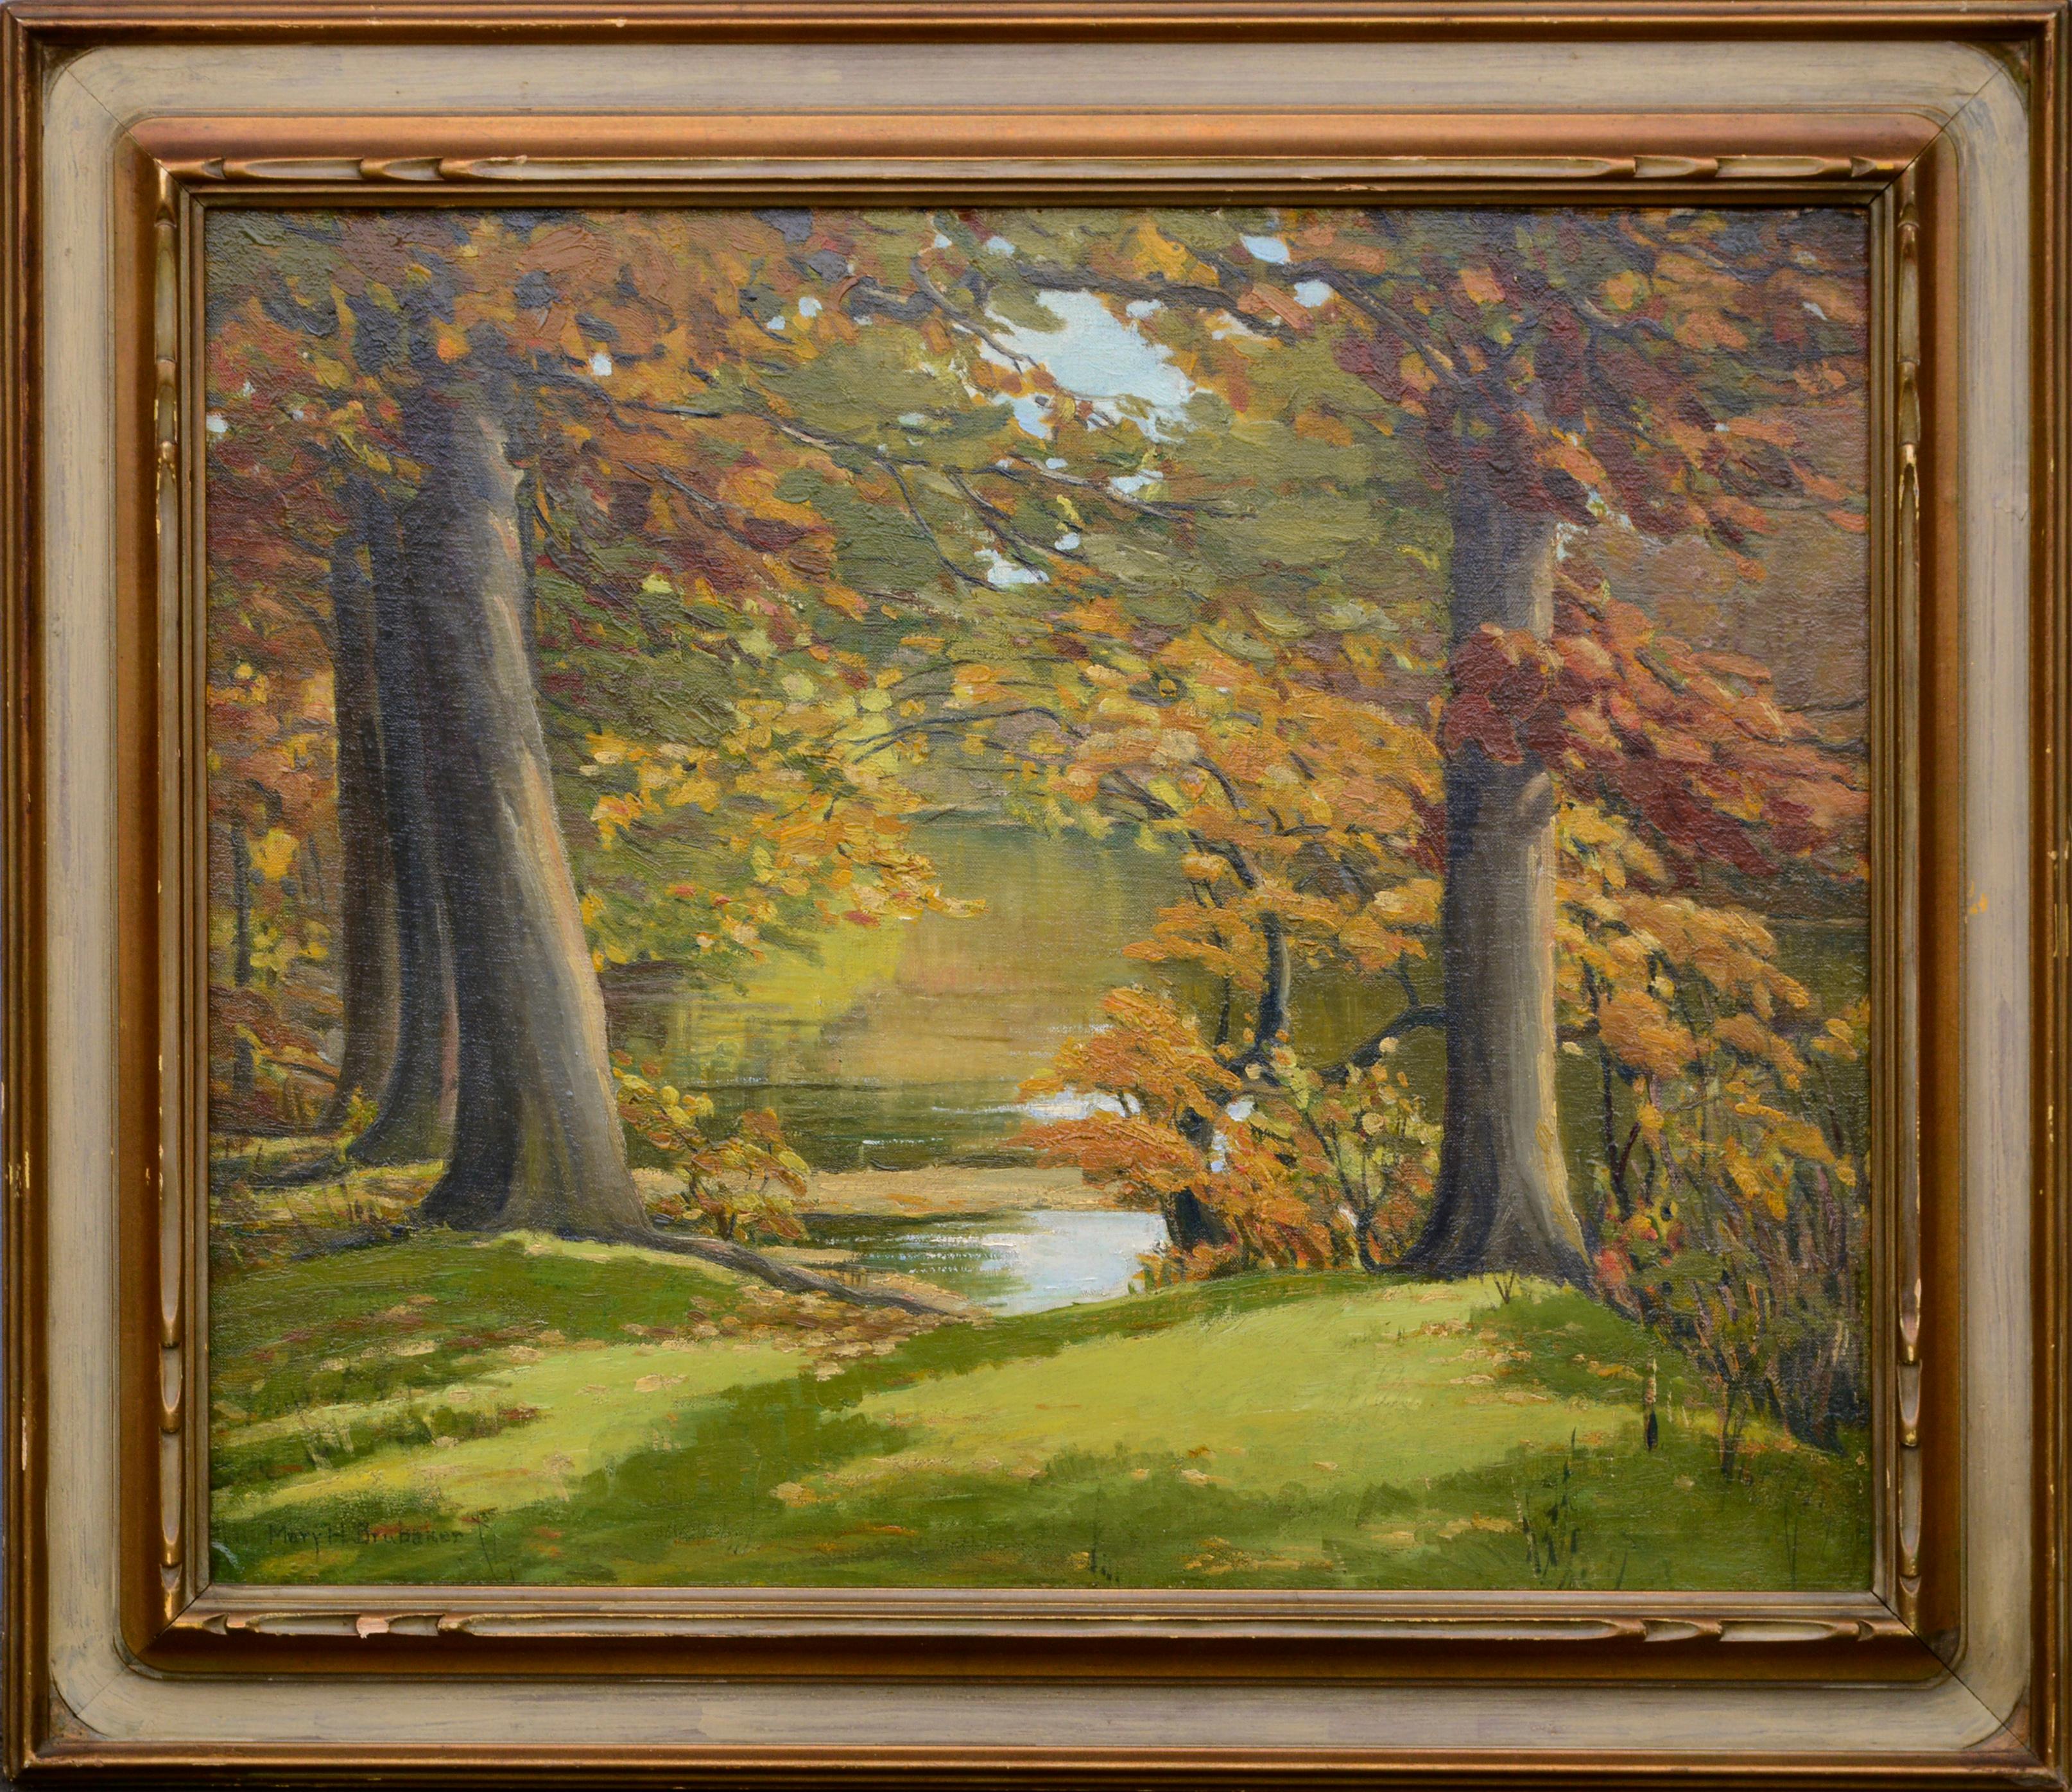 Mary H. Brubaker Landscape Painting - Elm Trees in Autumn Landscape in Antique Newcomb-Macklin Frame